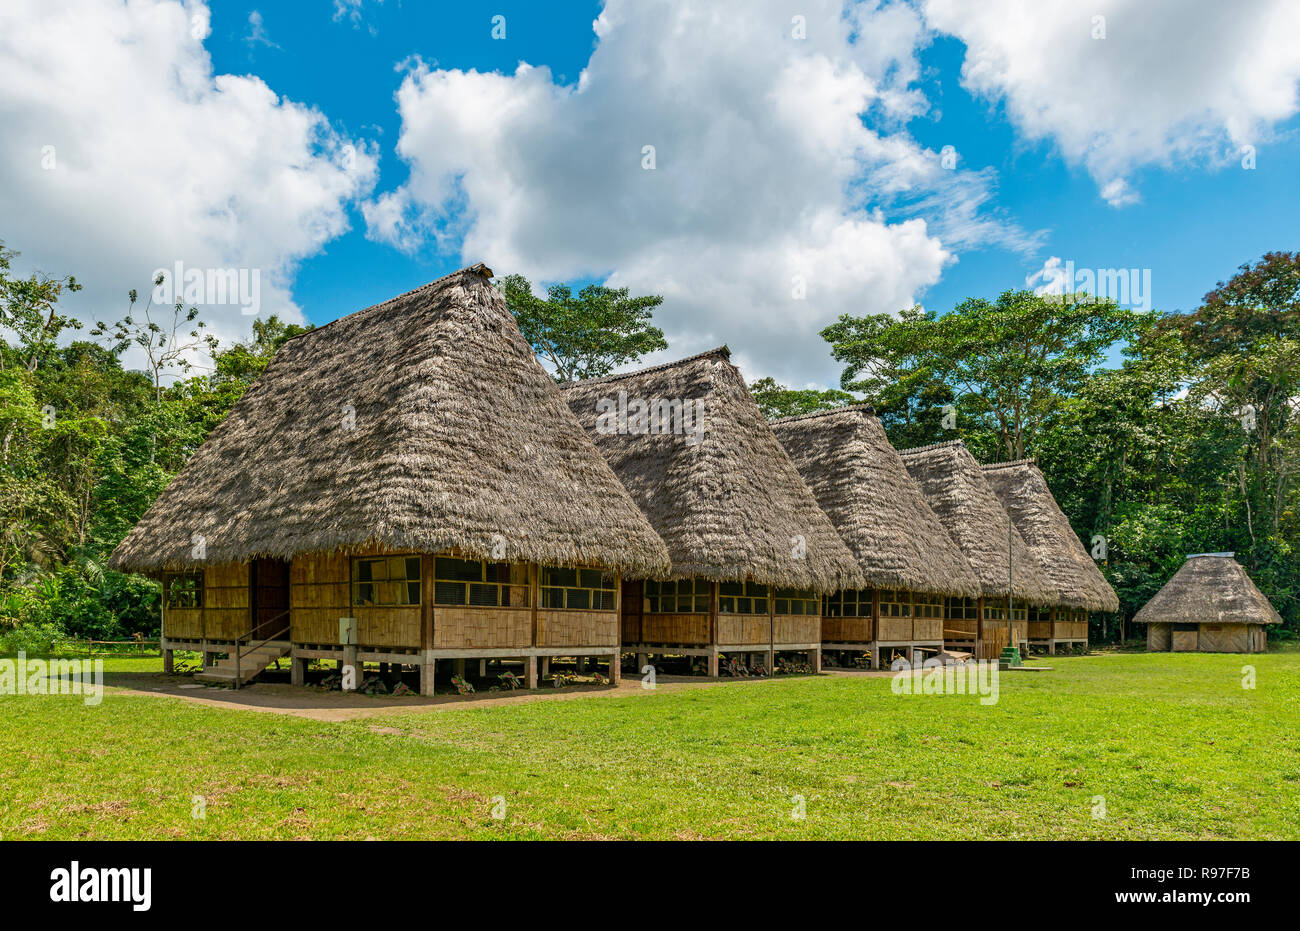 Traditional housing in large wooden huts with palm leaf roof in the Amazon Rainforest, Yasuni national park, Ecuador. Stock Photo